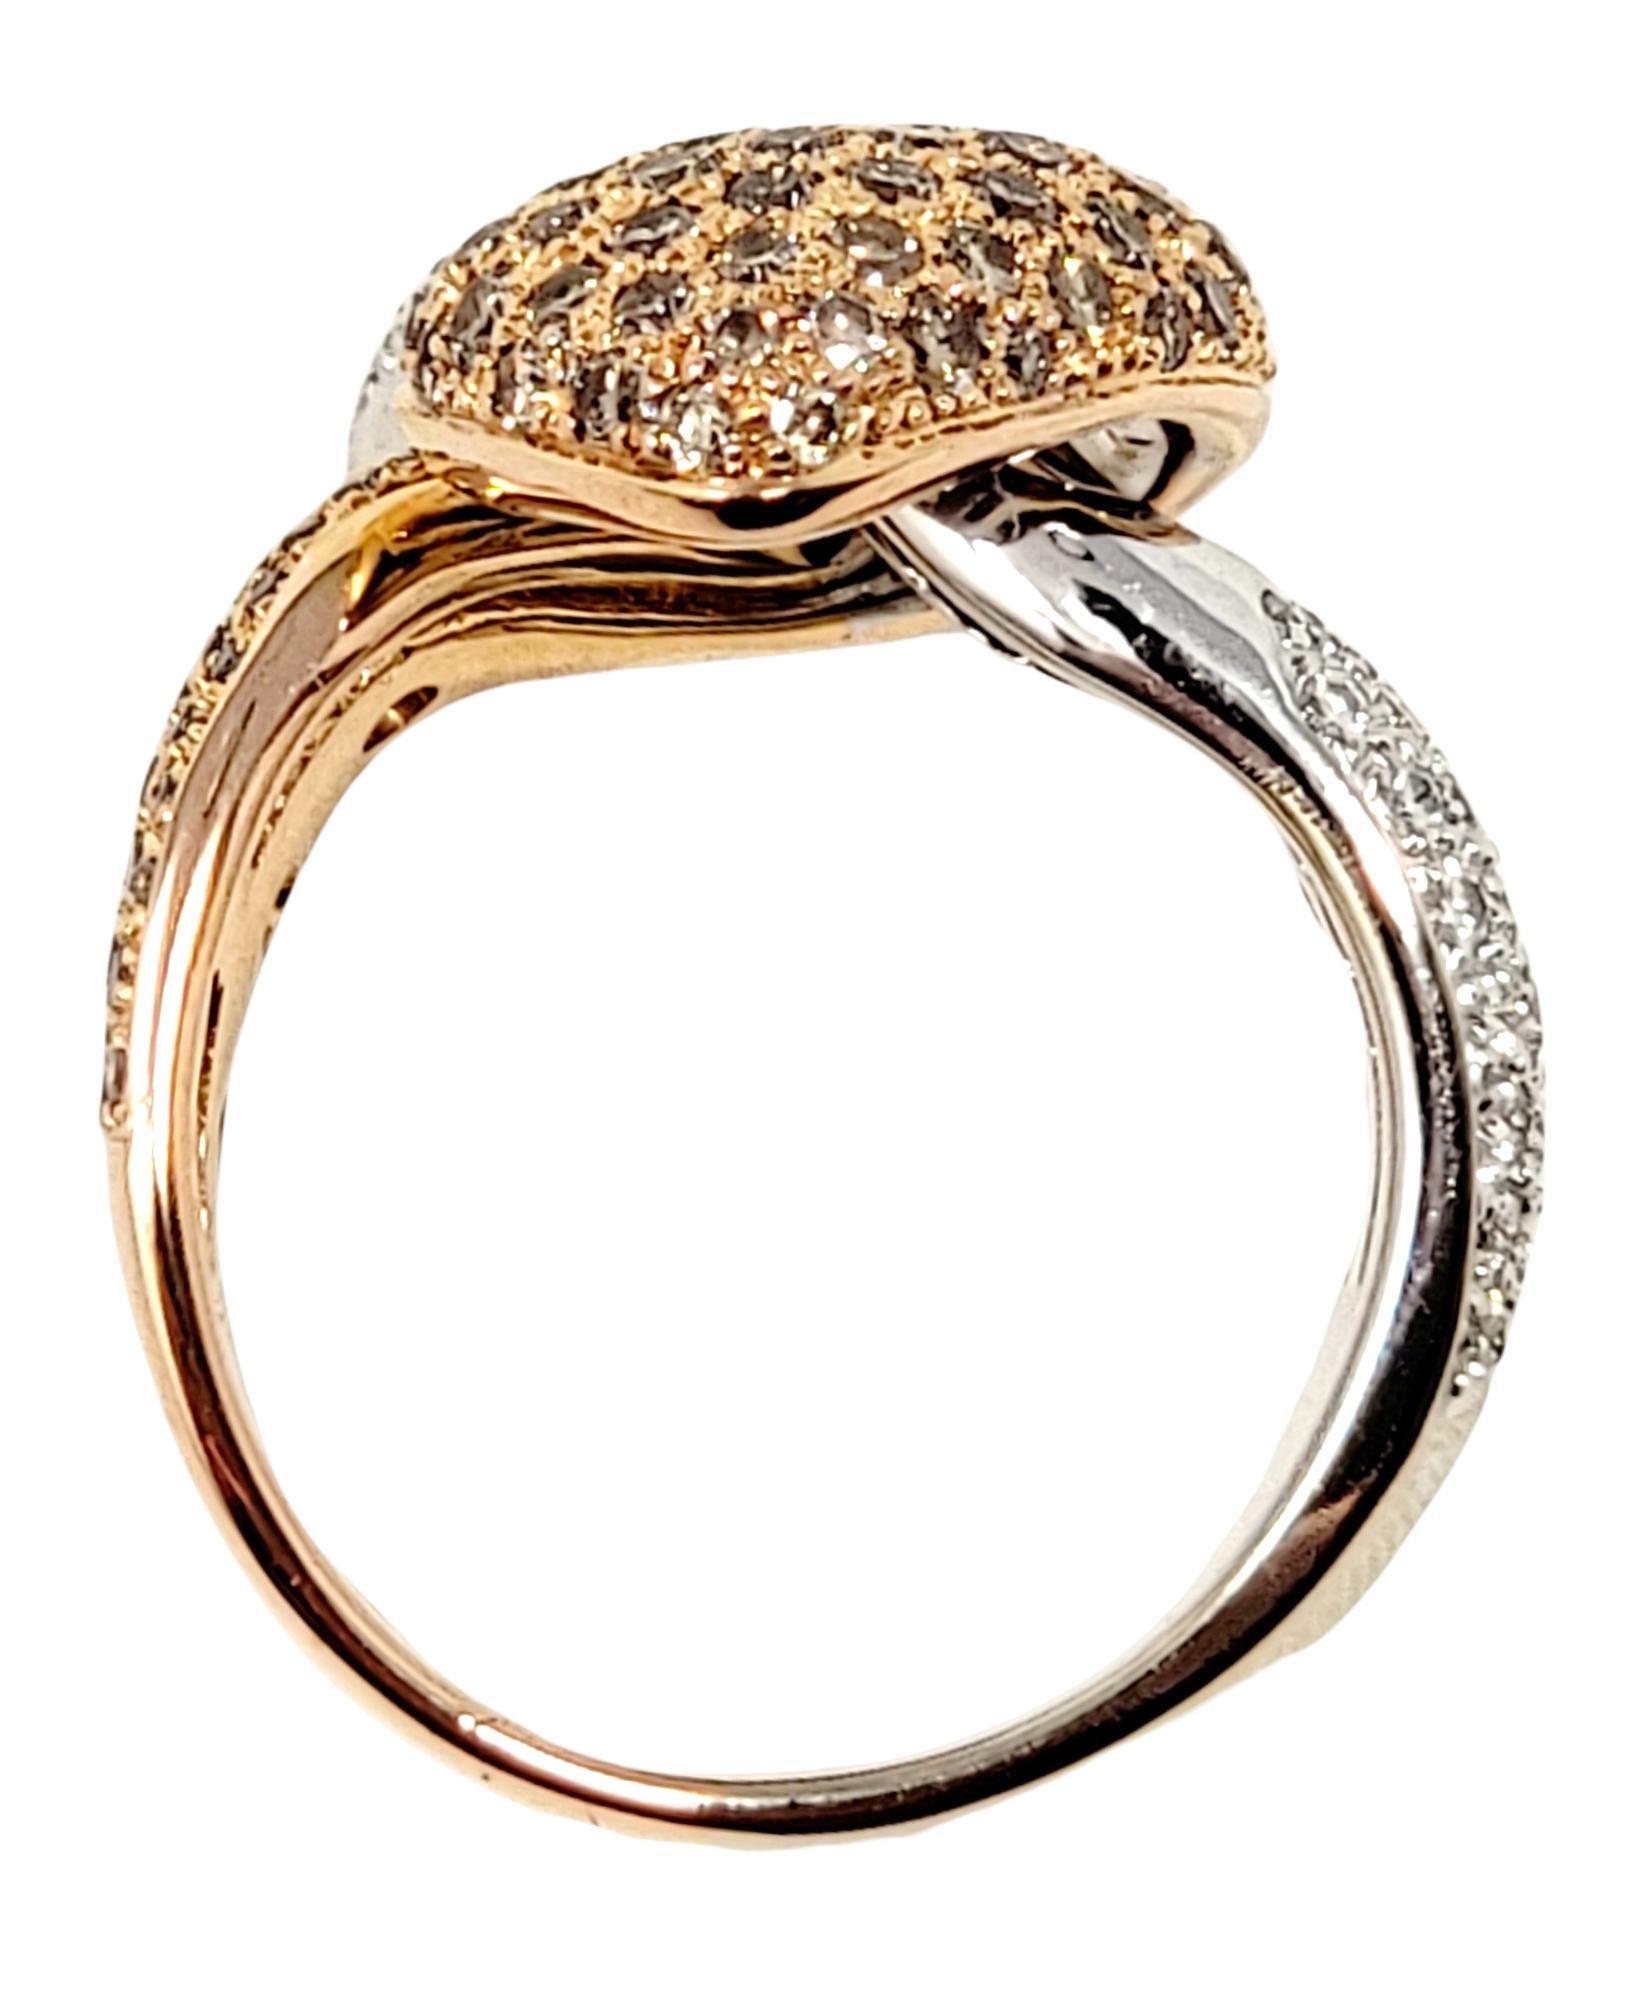 Hans D. Kreiger Brown and White Pave Diamond Bypass Ring Two-Tone 18 Karat Gold For Sale 4